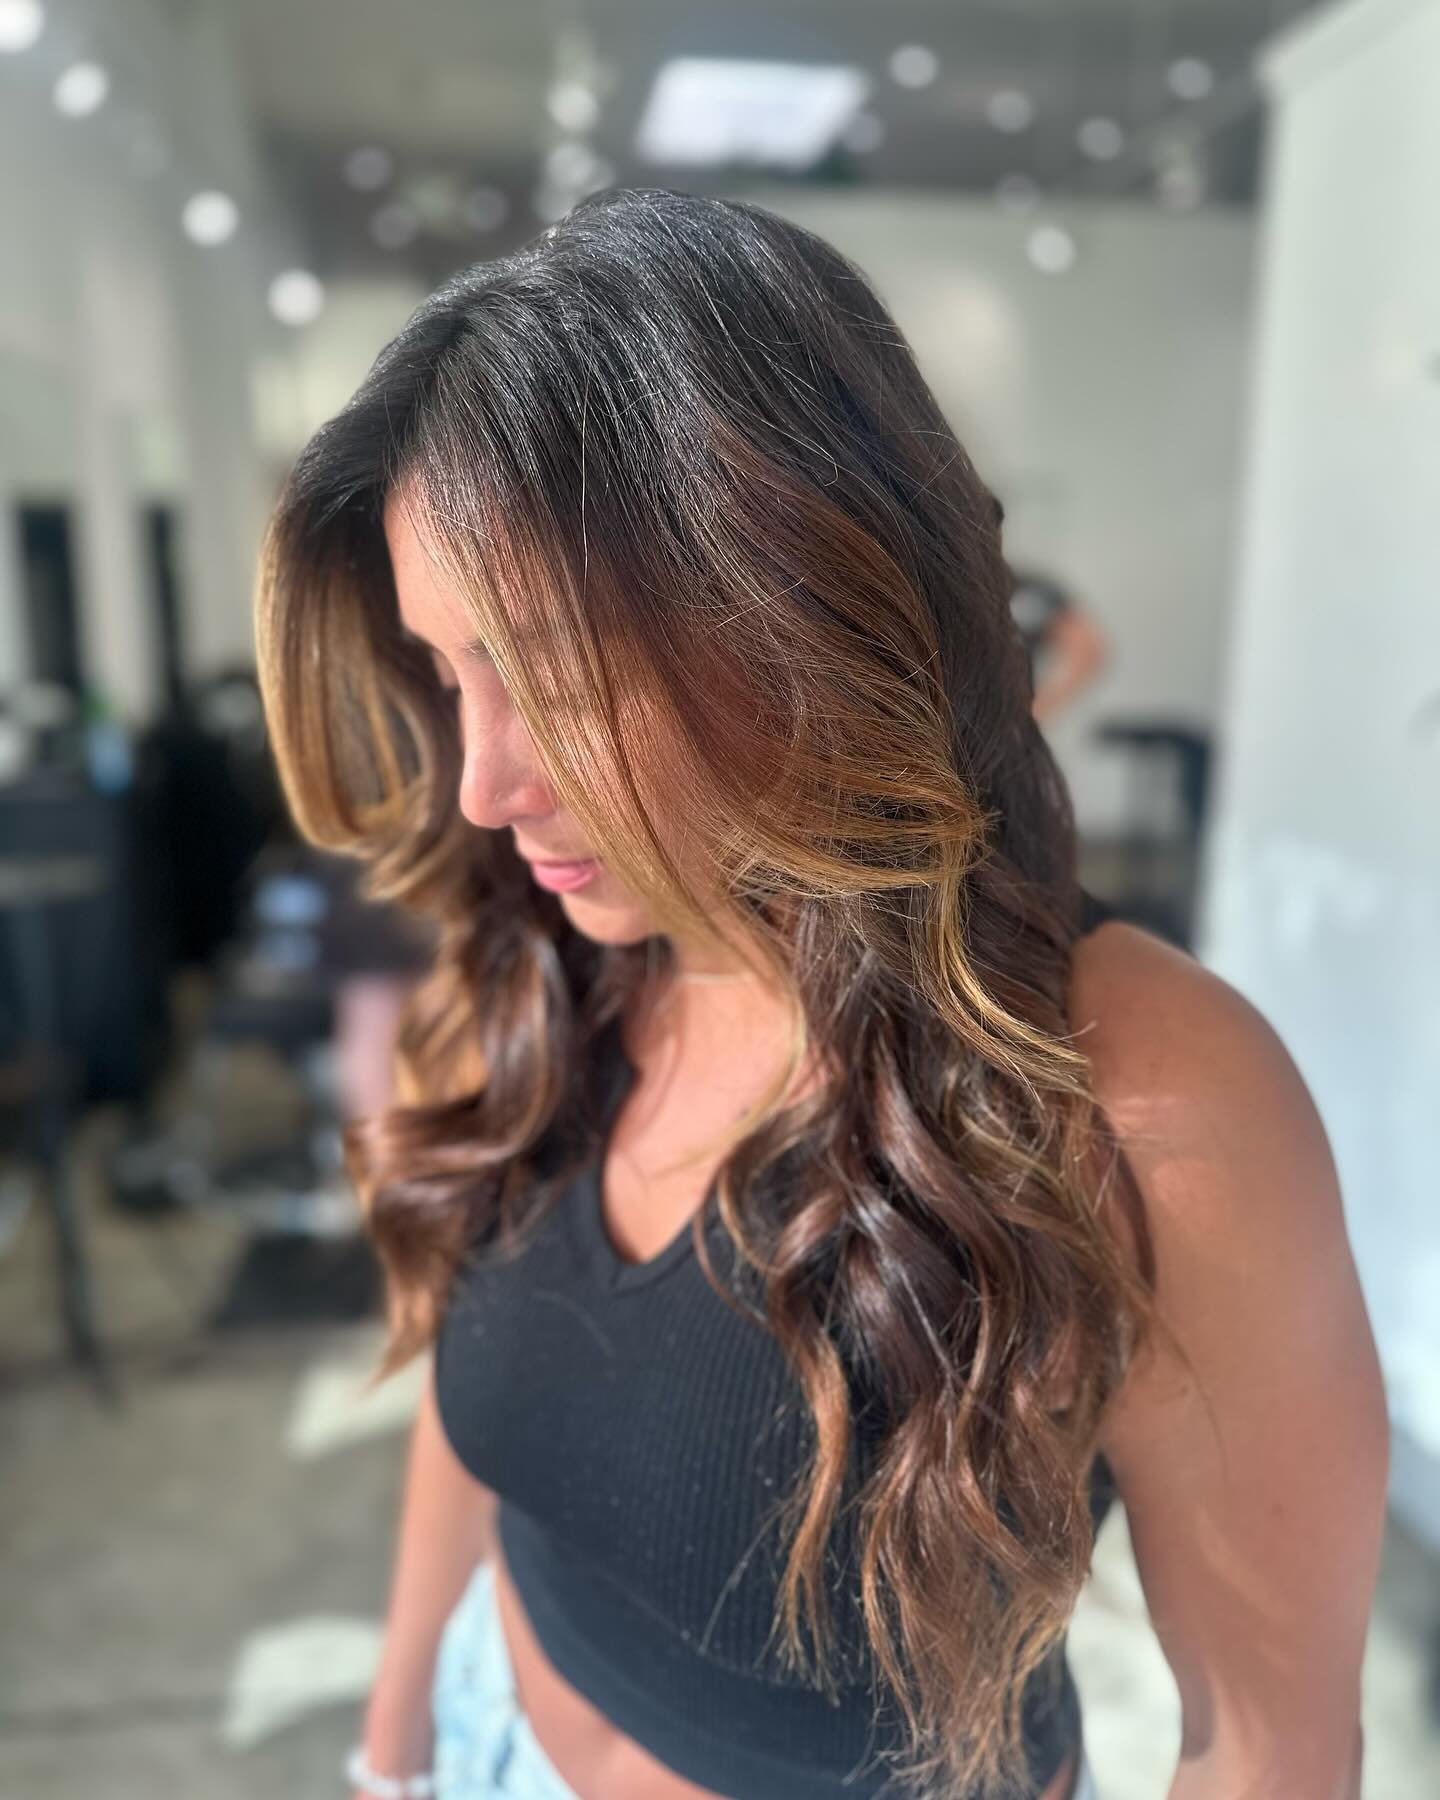 Root touch-up and gloss refresh by @blondebyjohnny ! ( yes we know. He does brunettes as well!!) healthy hair all spring and summer 😉 

With summer around the corner, you deserve to feel and look your best 🫶🏼 Book your next appointment now! While 